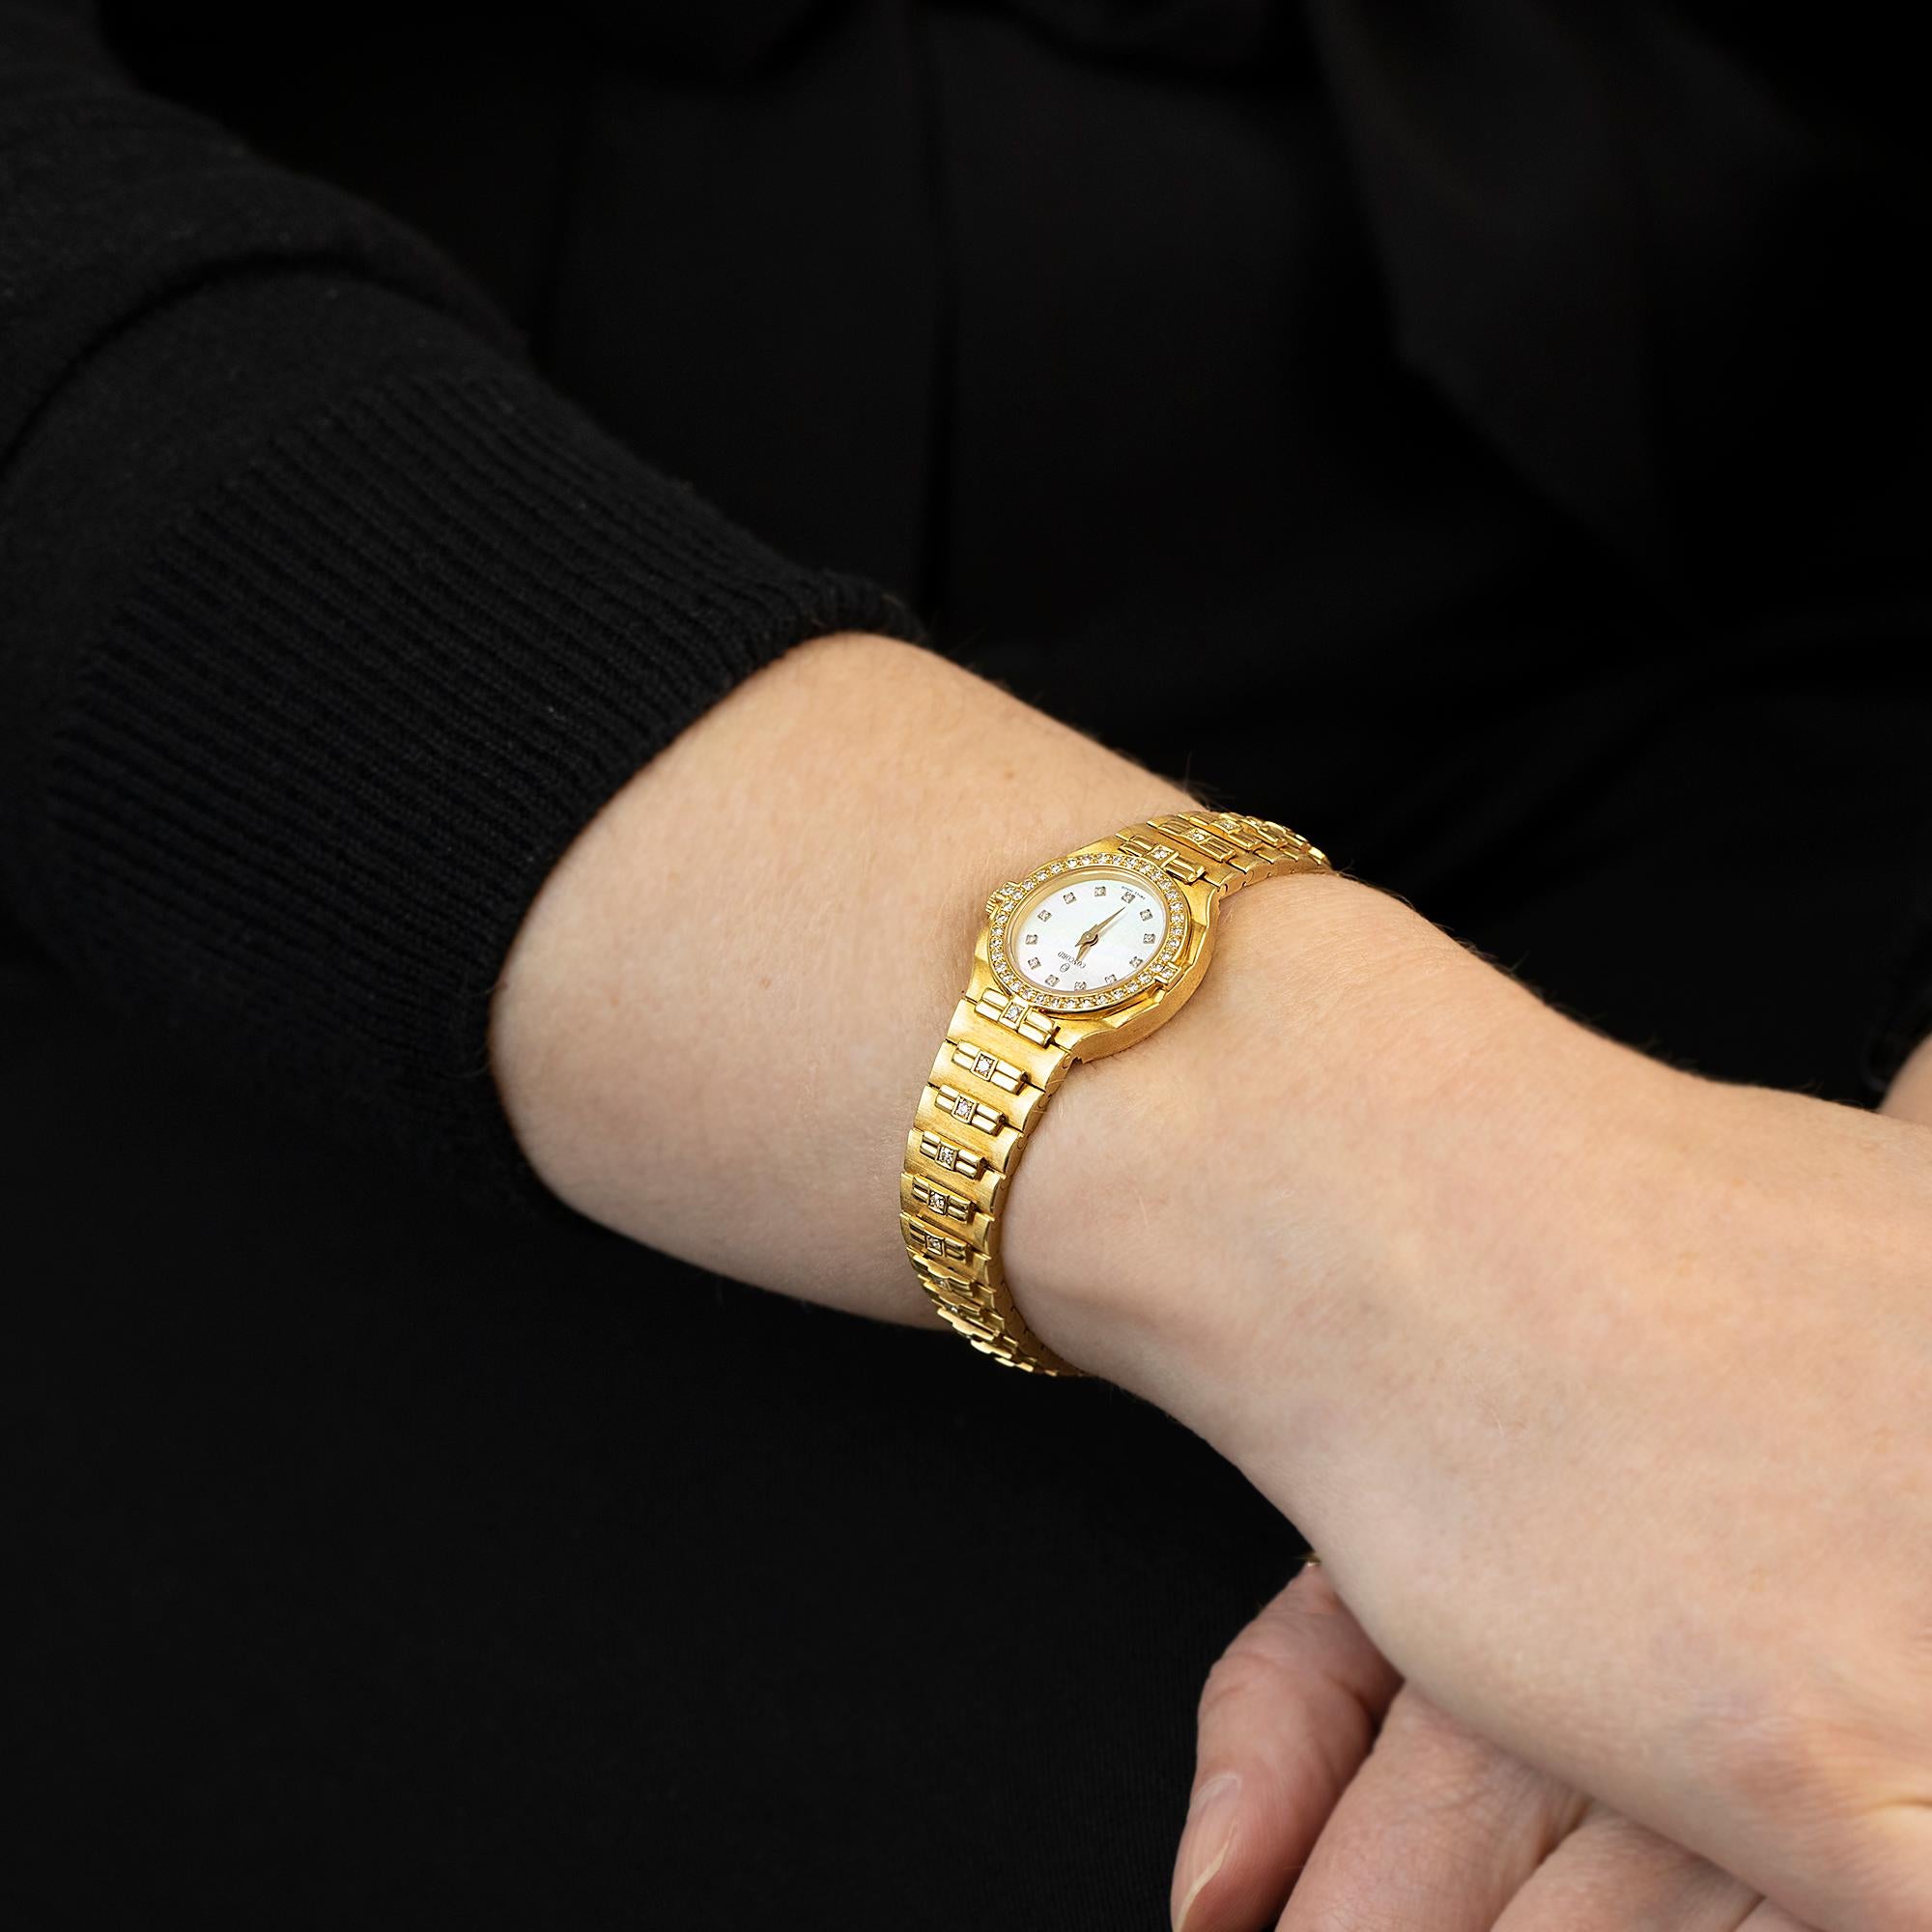 One diamond set ladies Concord brand wristwatch with a matching bracelet in 18k gold. The watch has a Swiss quartz movement, a mother-of-pearl dial, and gold hands with diamond set markers. The bracelet clasp has adjustable sizing 15cm to 16cm